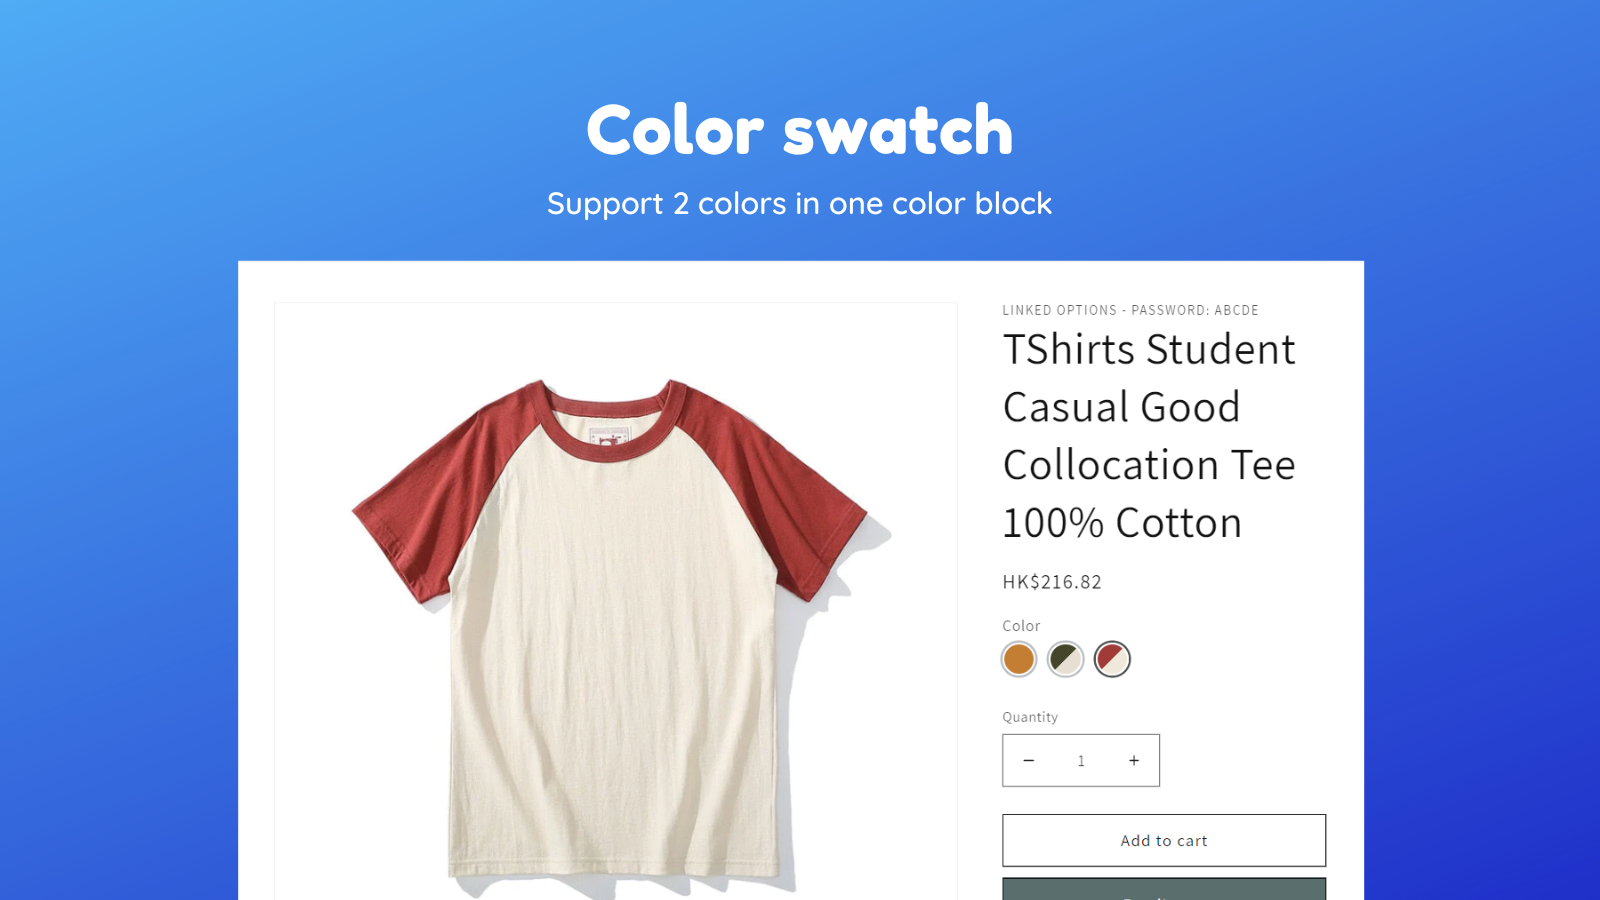 Linked options with color swatch